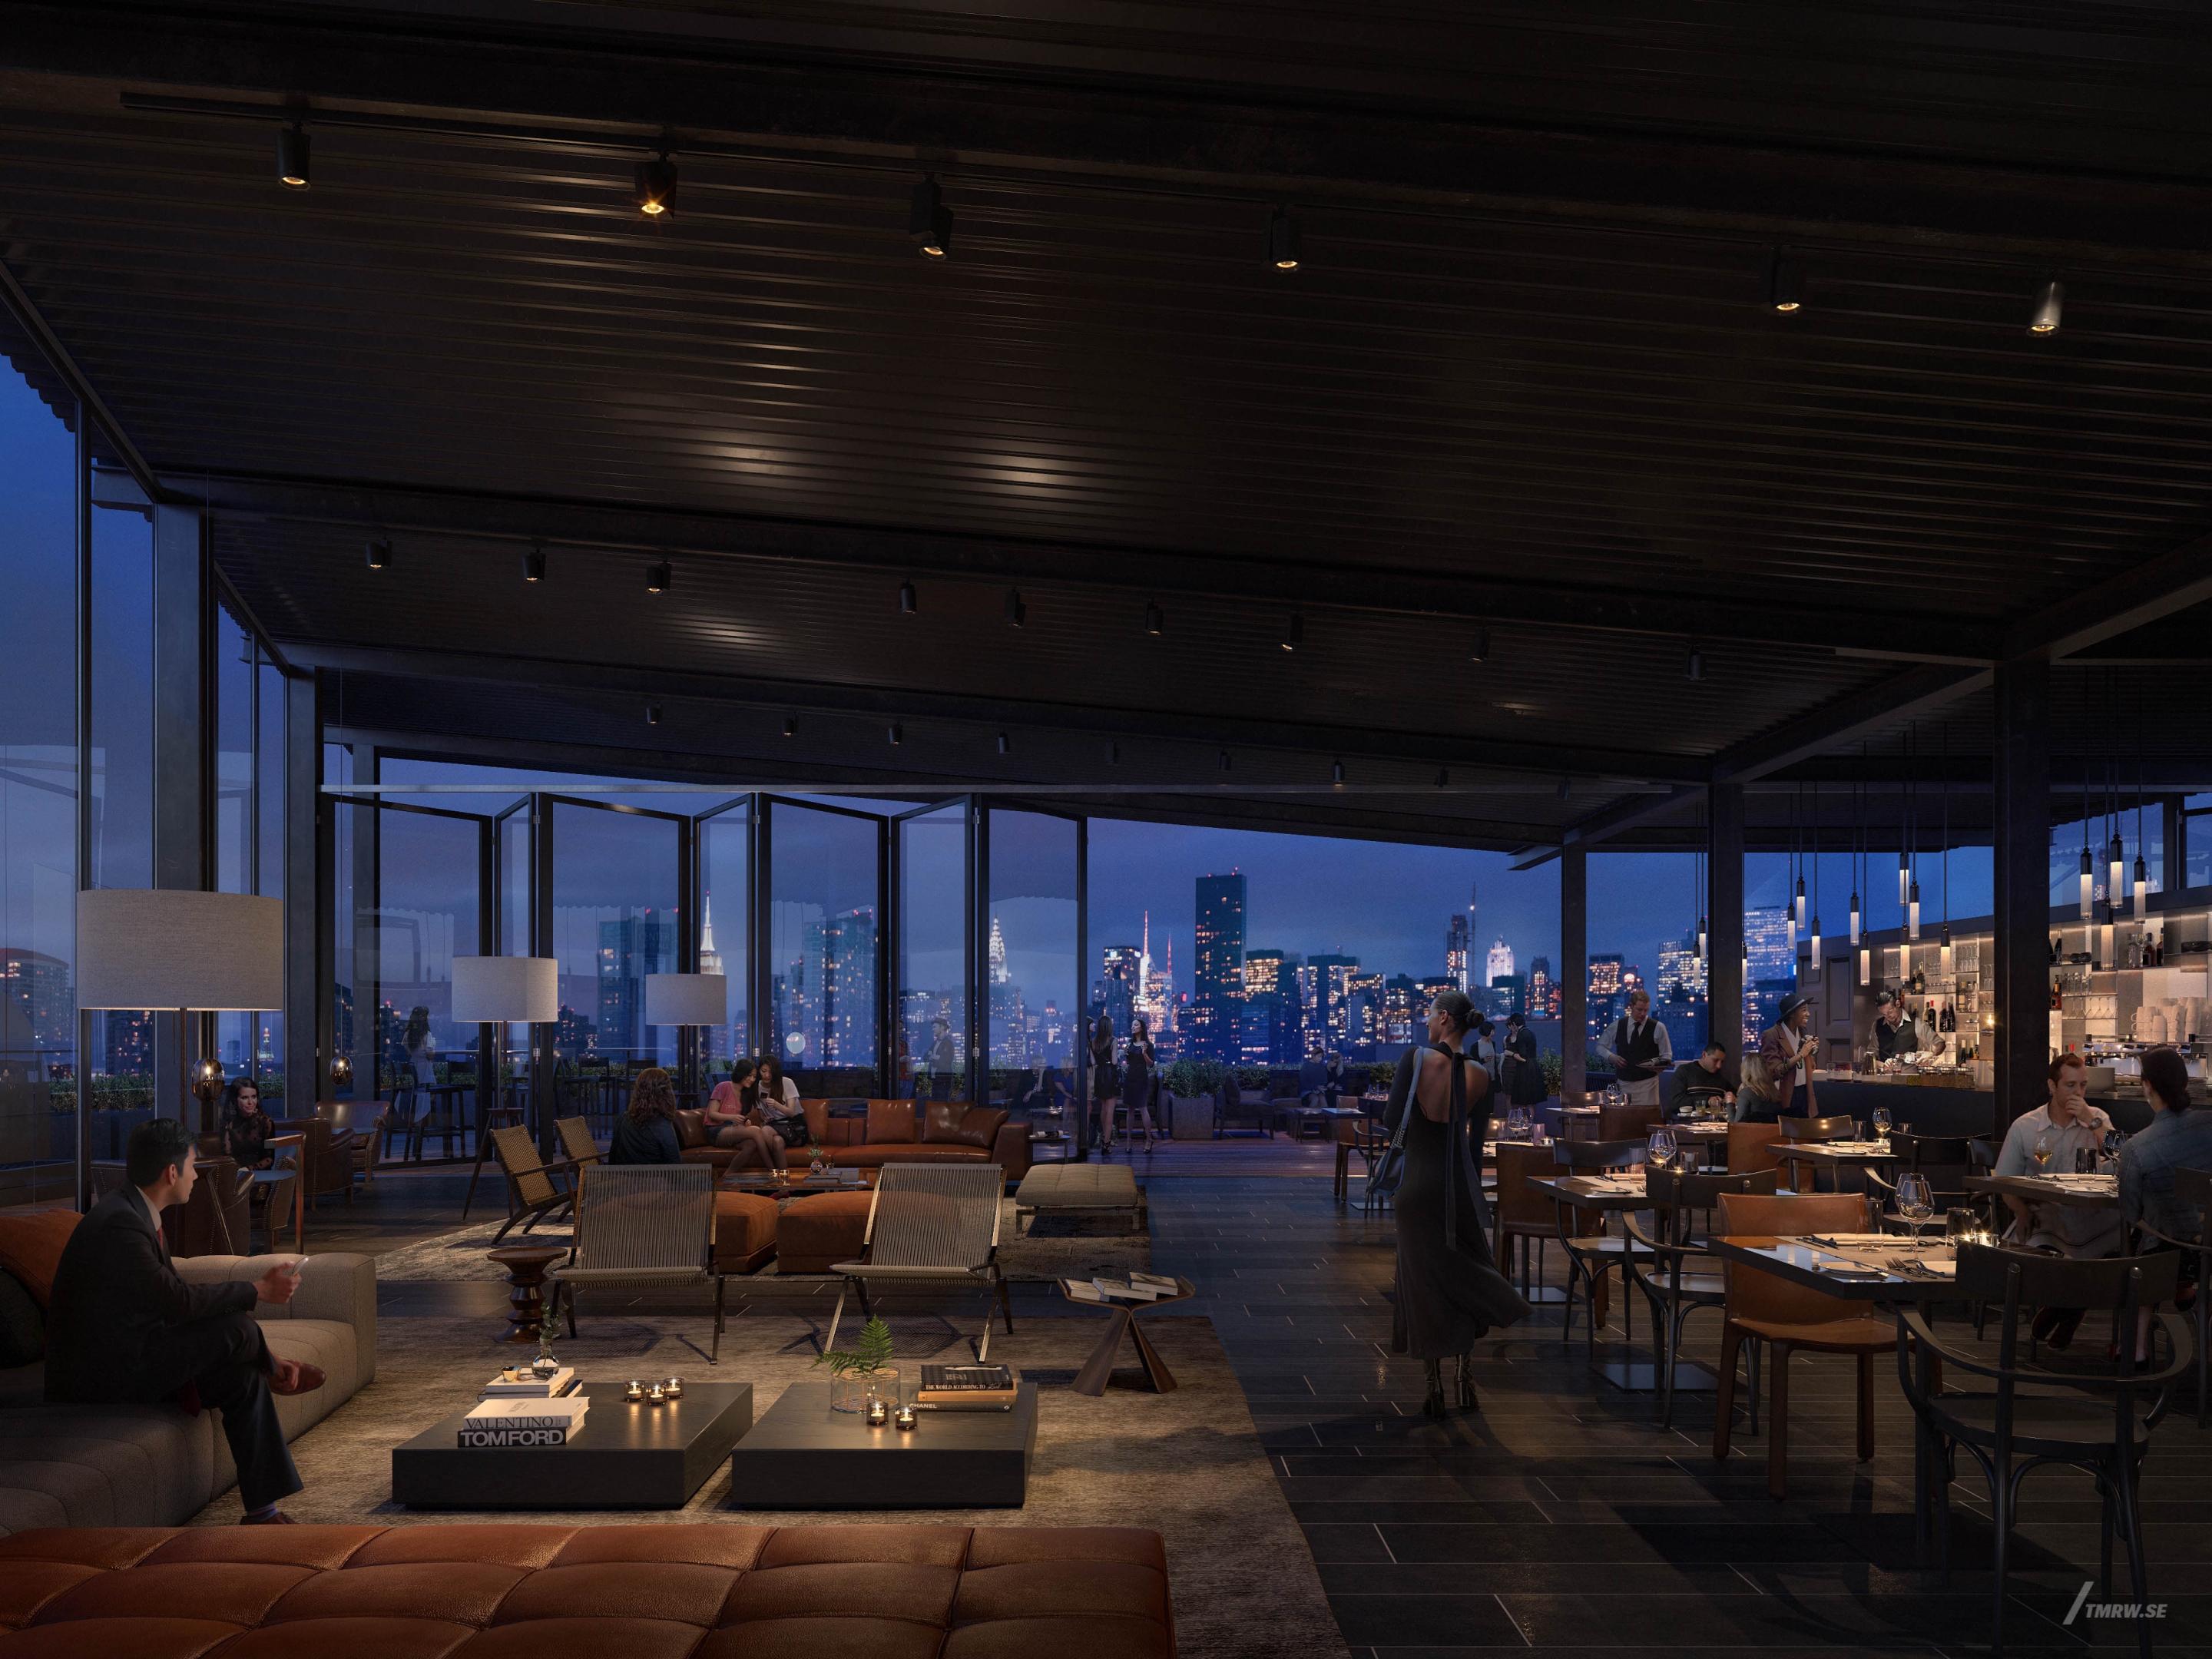 Architectural visualization of Court Square for Gensler, rooftop restaurant with a view over skyscrapers at night